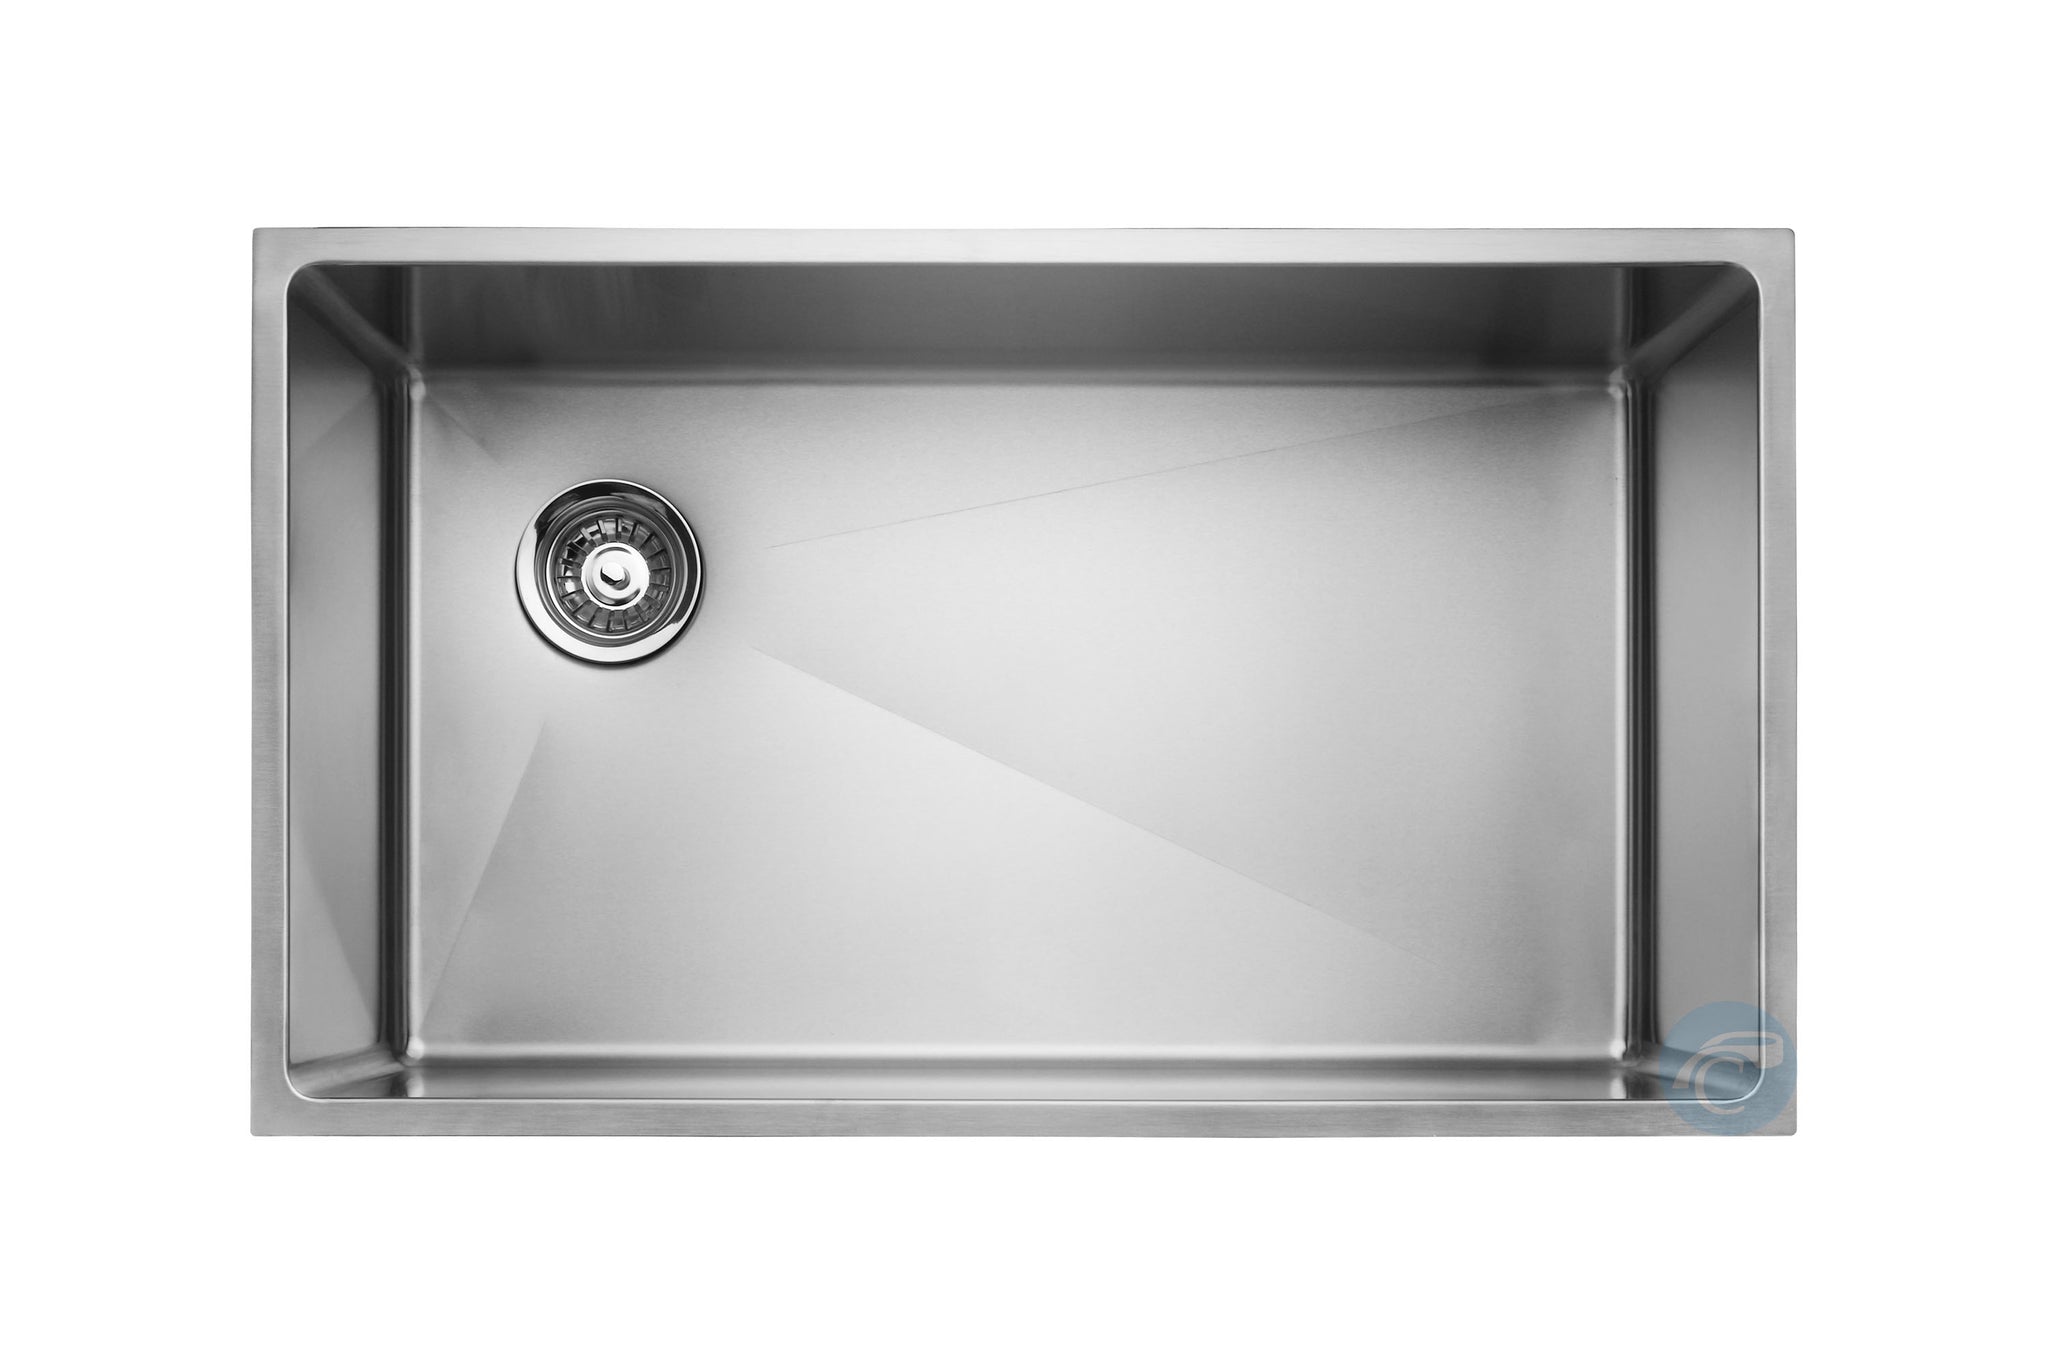 Master Chef Amiens Single Bowl Undermount Kitchen Sink With Drain On Left Side